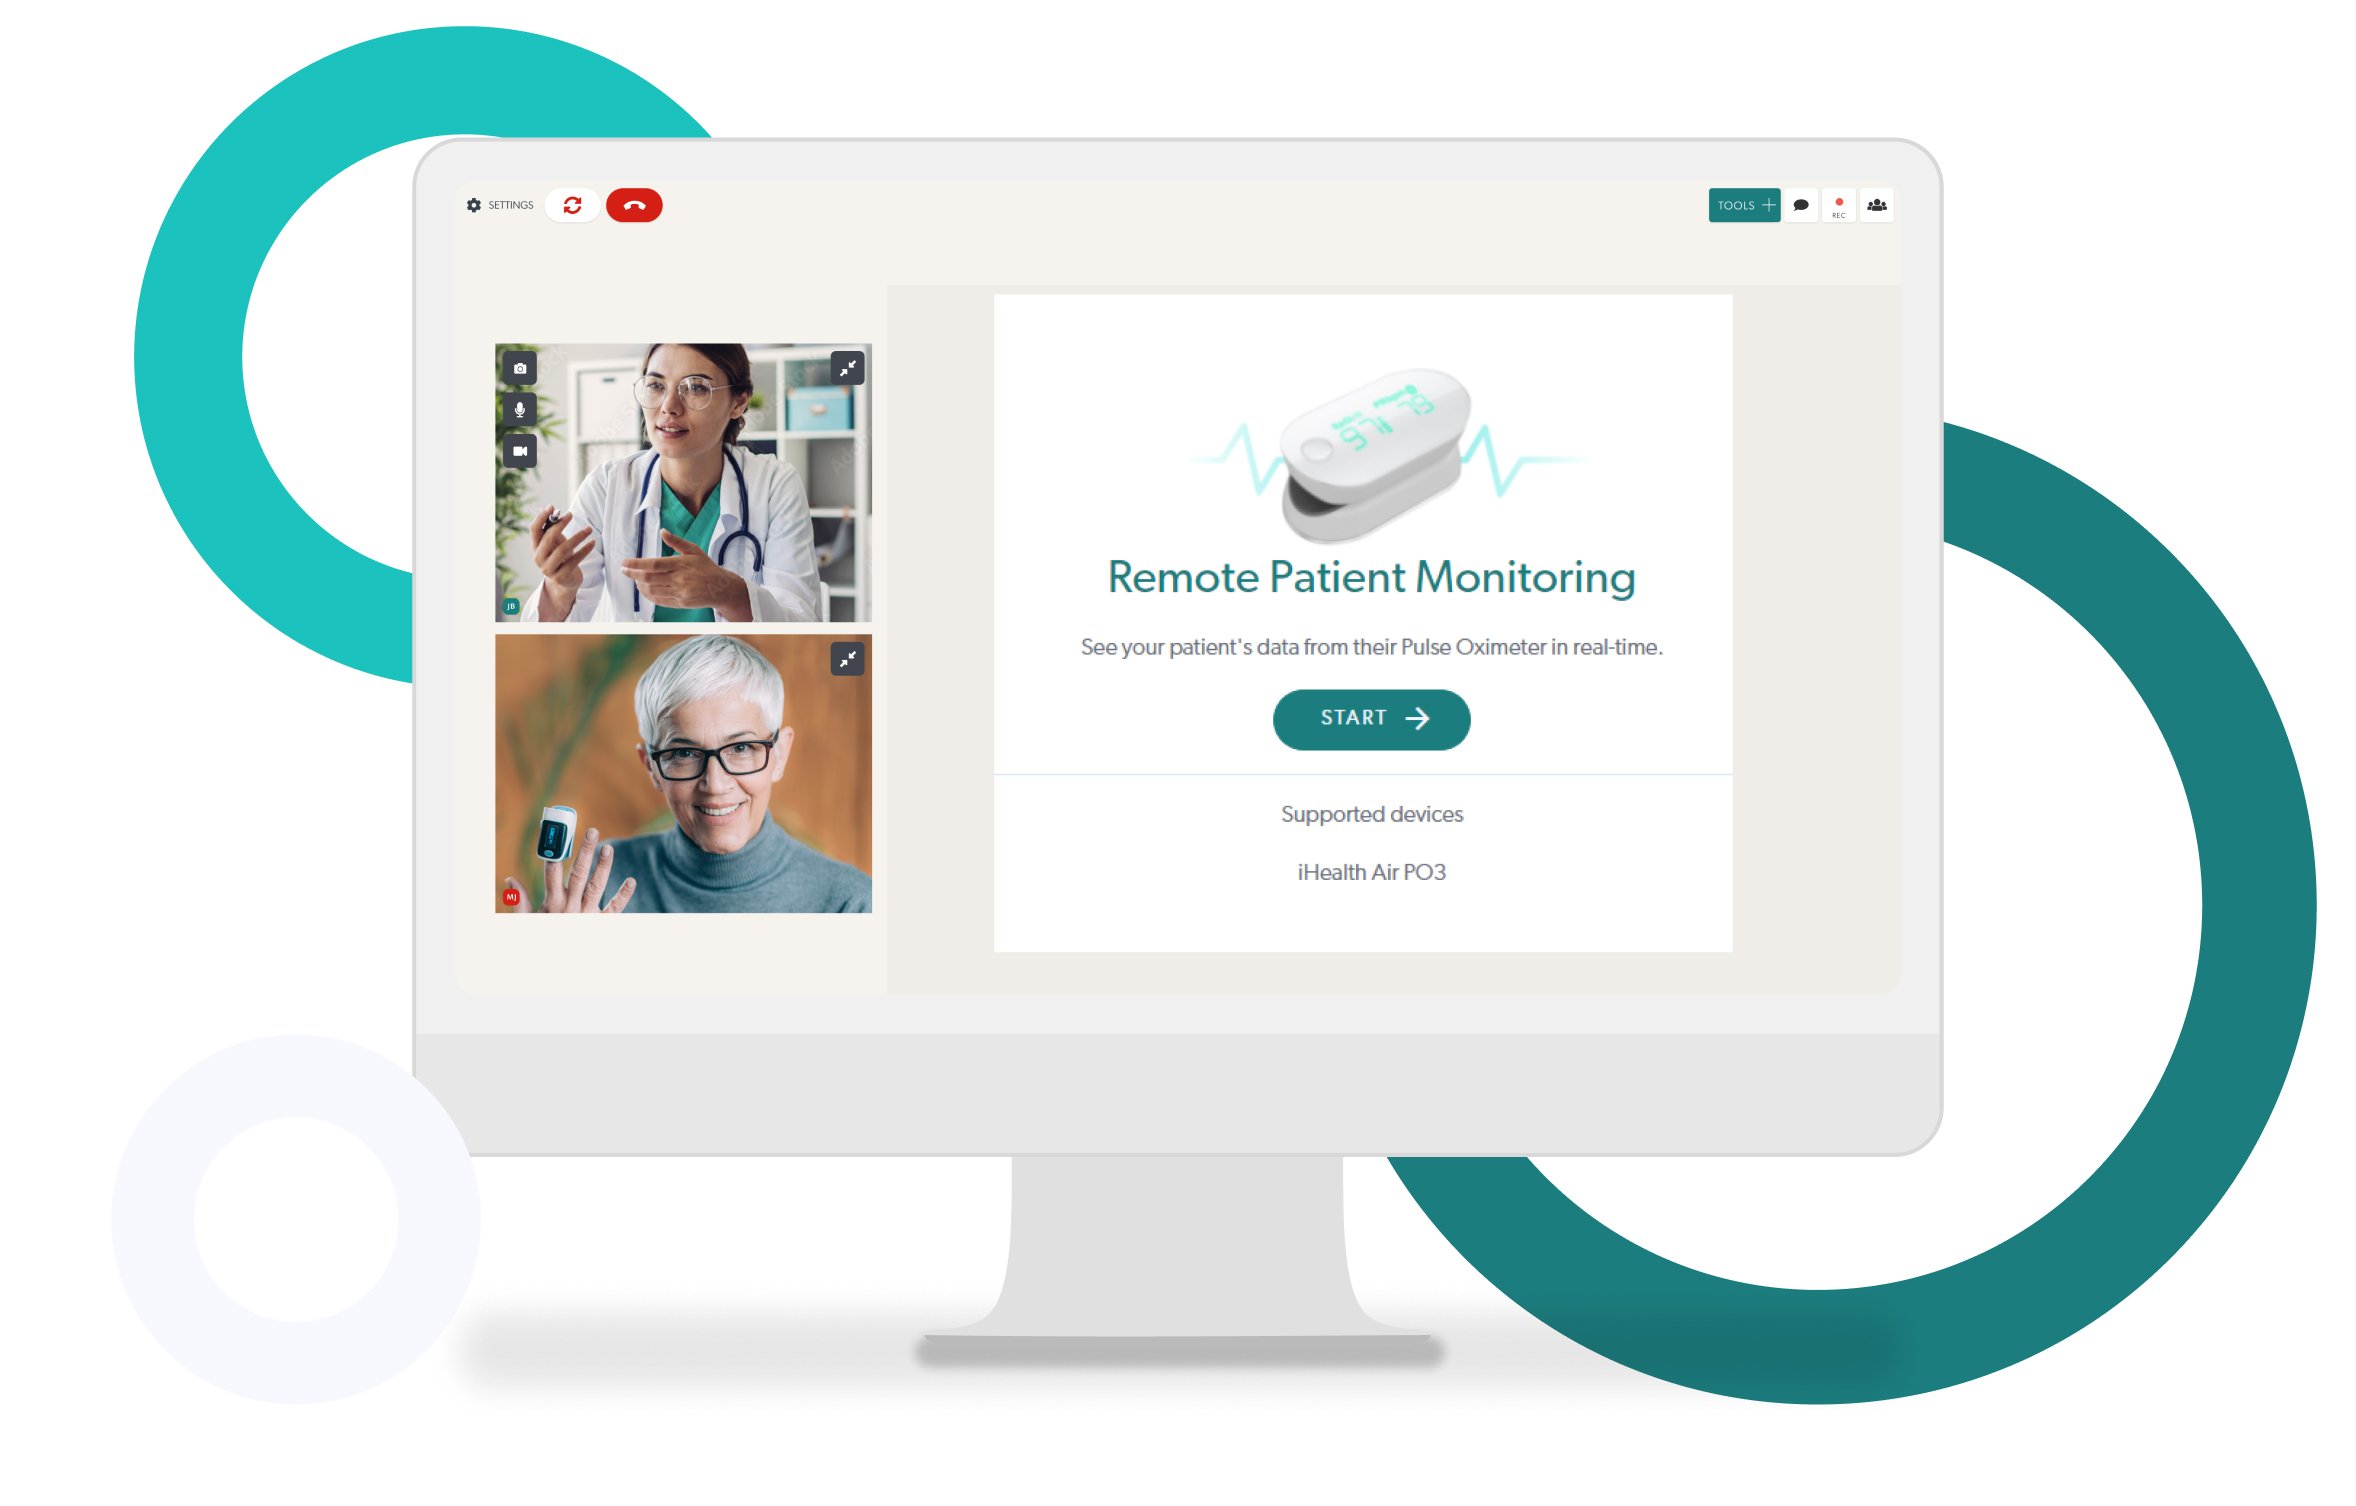 Coviu to launch remote patient monitoring solution